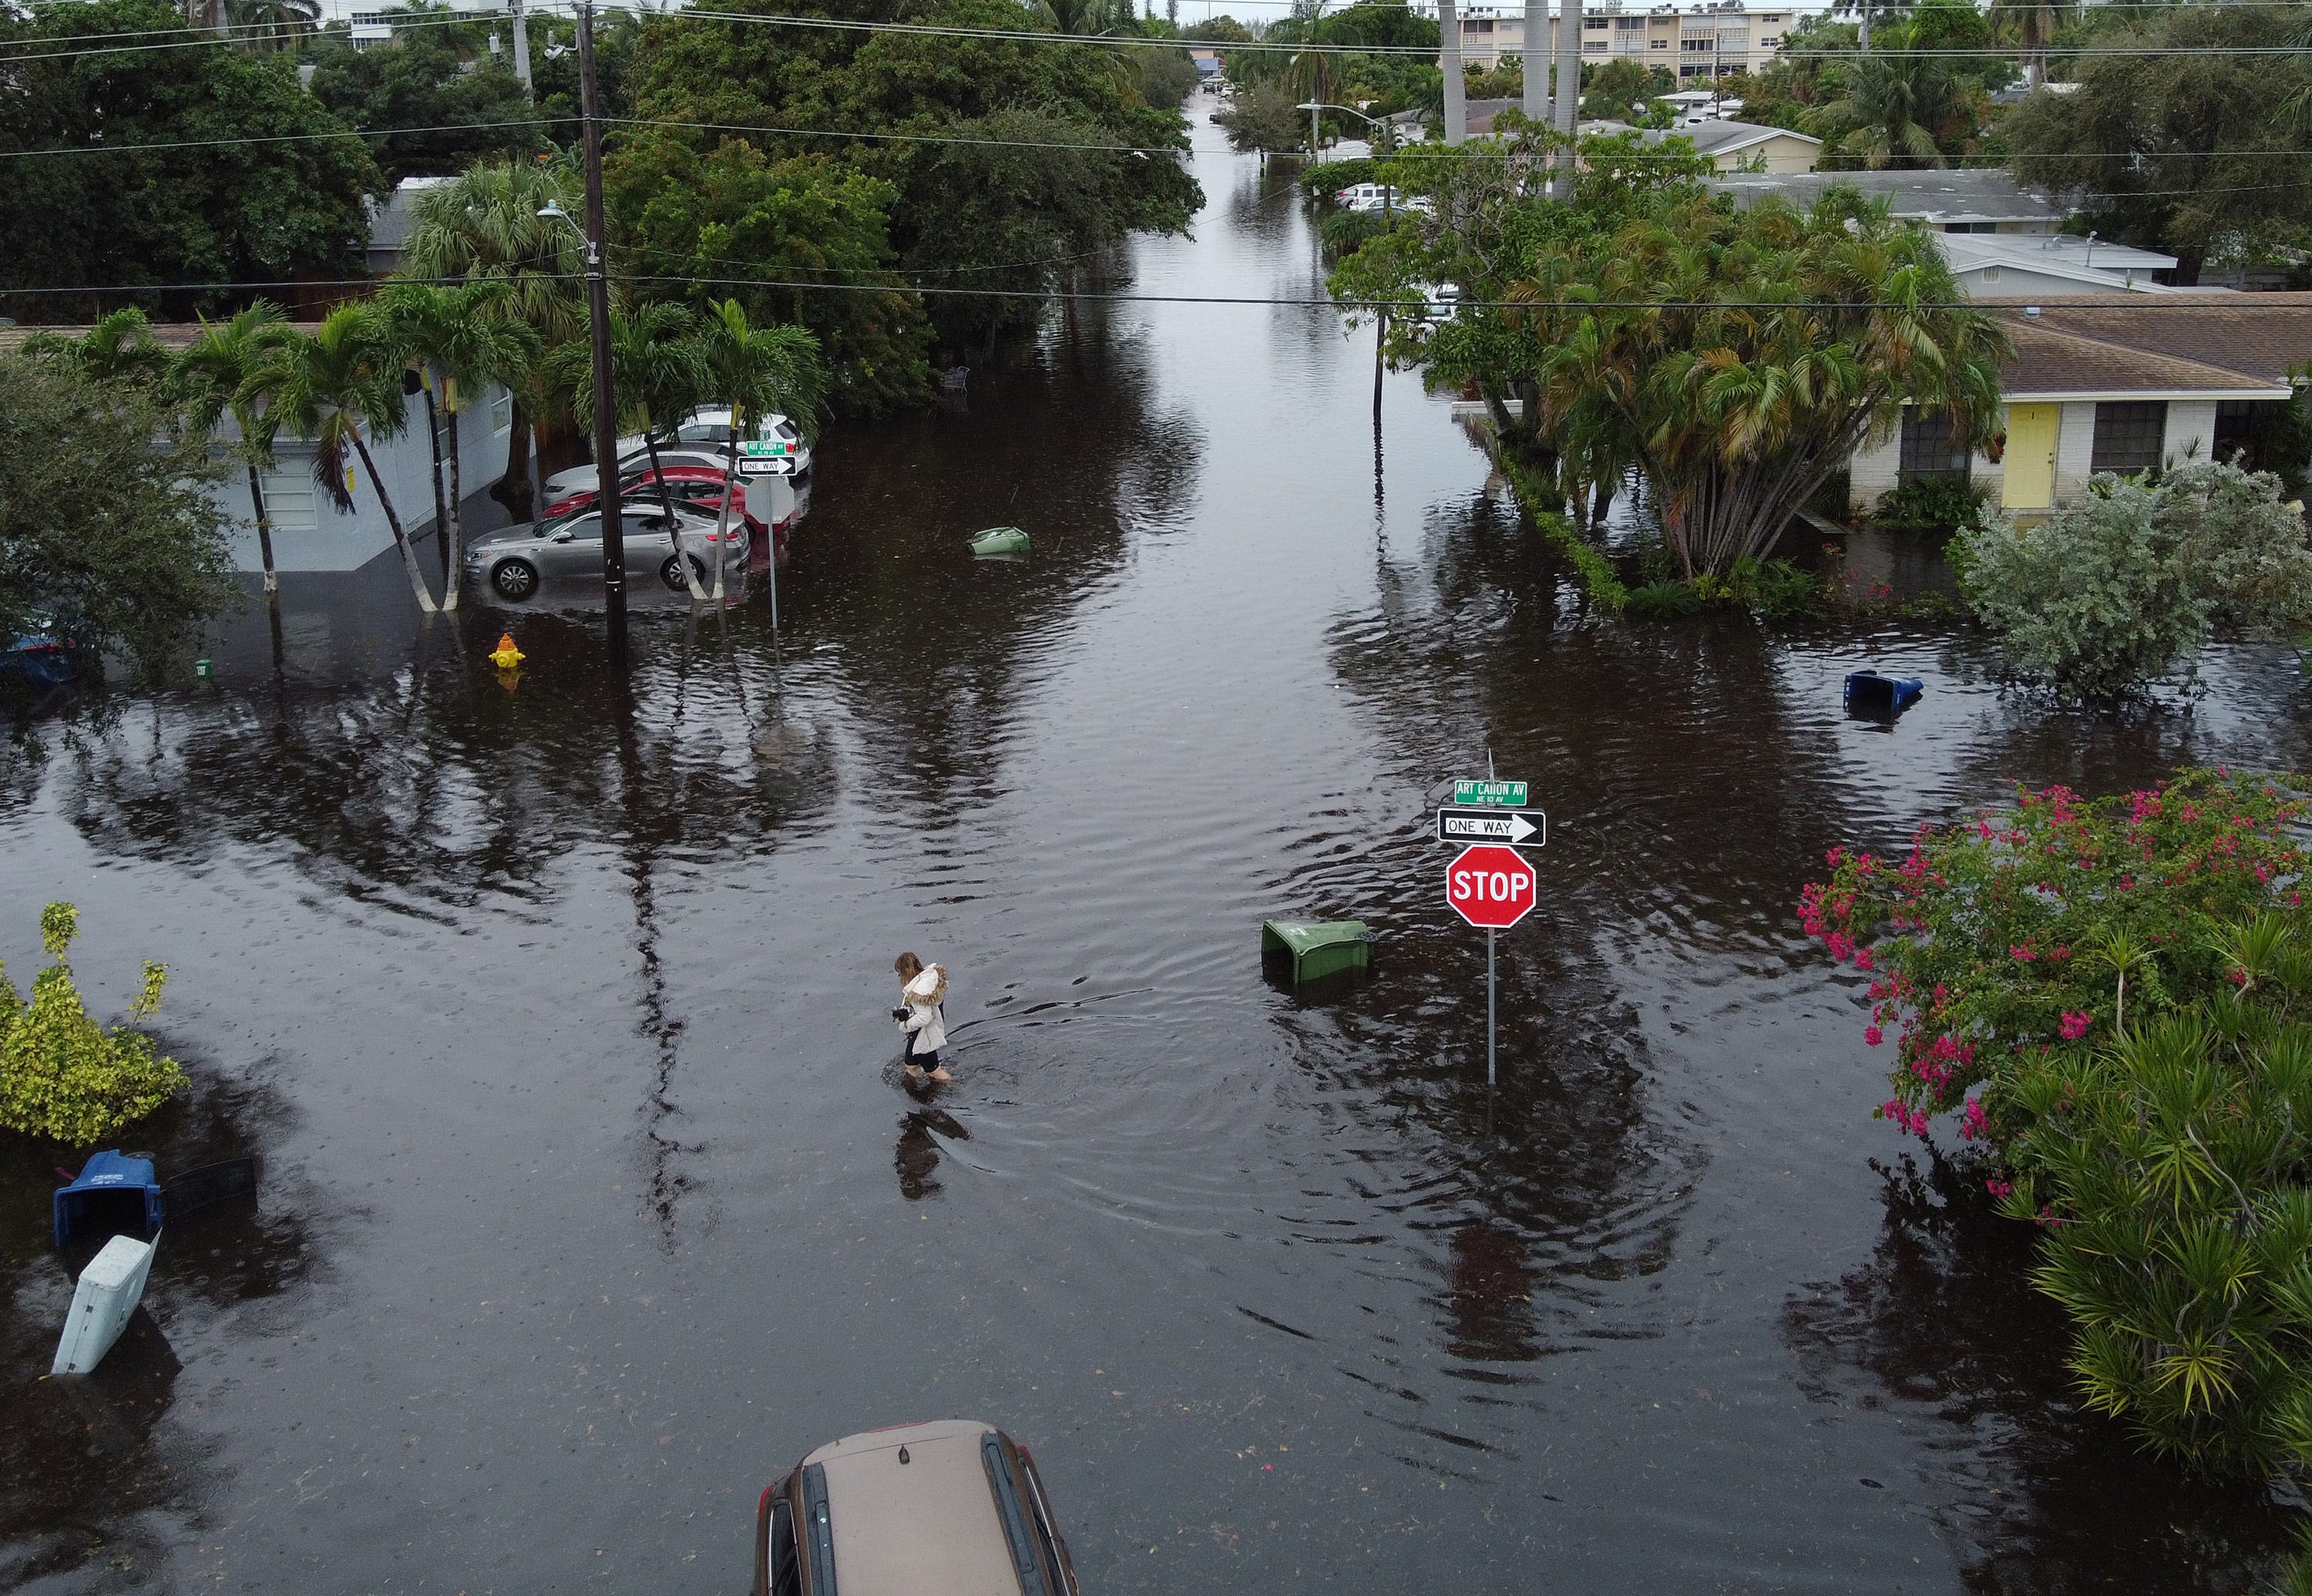 An aerial view from a drone shows a woman crossing a street inundated with floodwater on Dec. 23, 2019, in Hallandale, Fla. Hallandale is in Broward County, which has the highest of any county in the country.